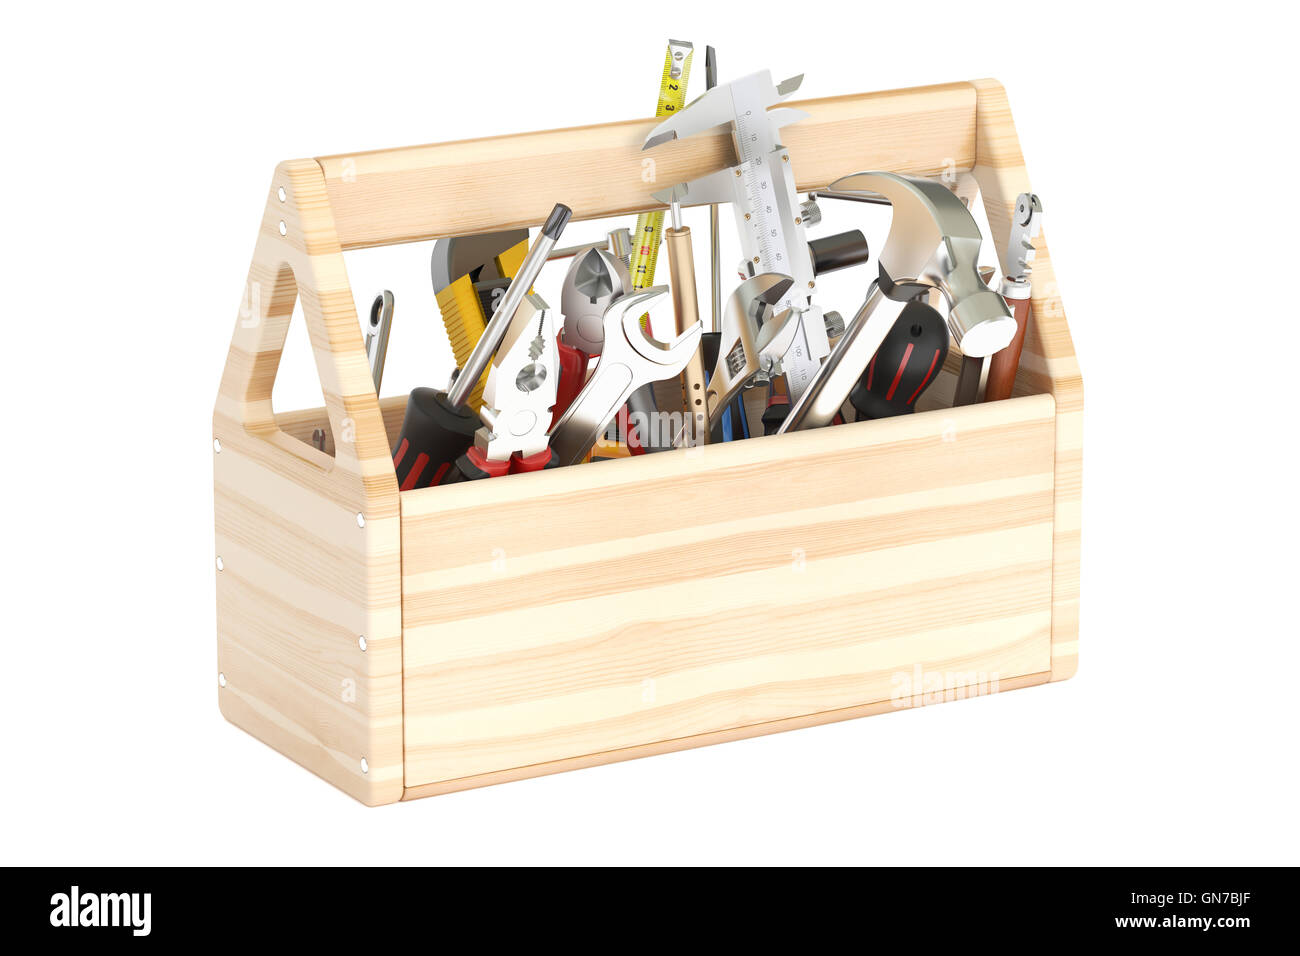 Wooden toolbox with tools, 3D rendering isolated on white background Stock Photo